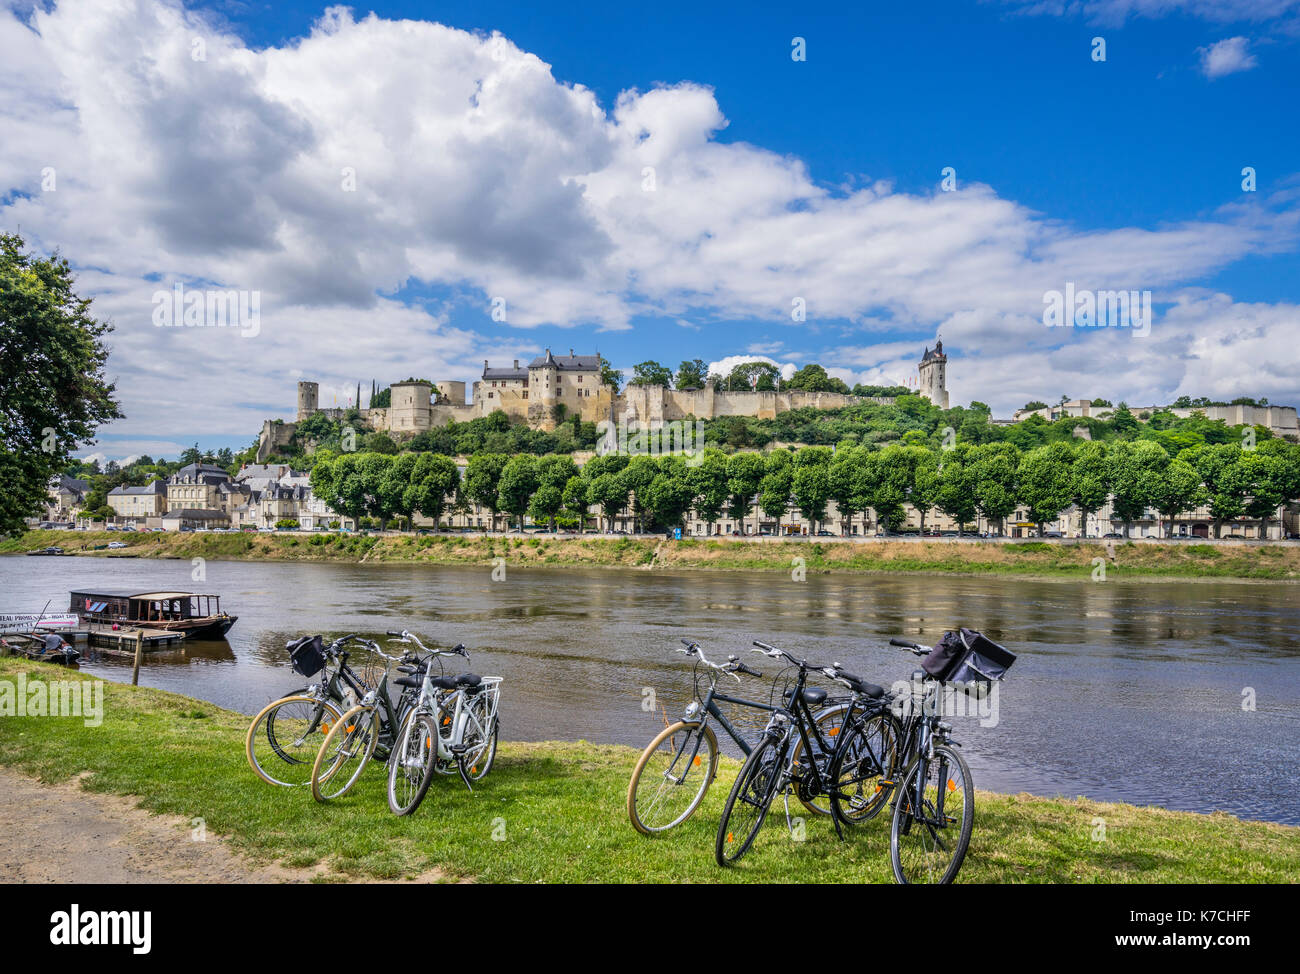 France, Centre-Val de Loire, Touraine, Chinon, cycling on the banks of the Vienne River against the backdrop of Château de Chinon on a rocky outcrop a Stock Photo